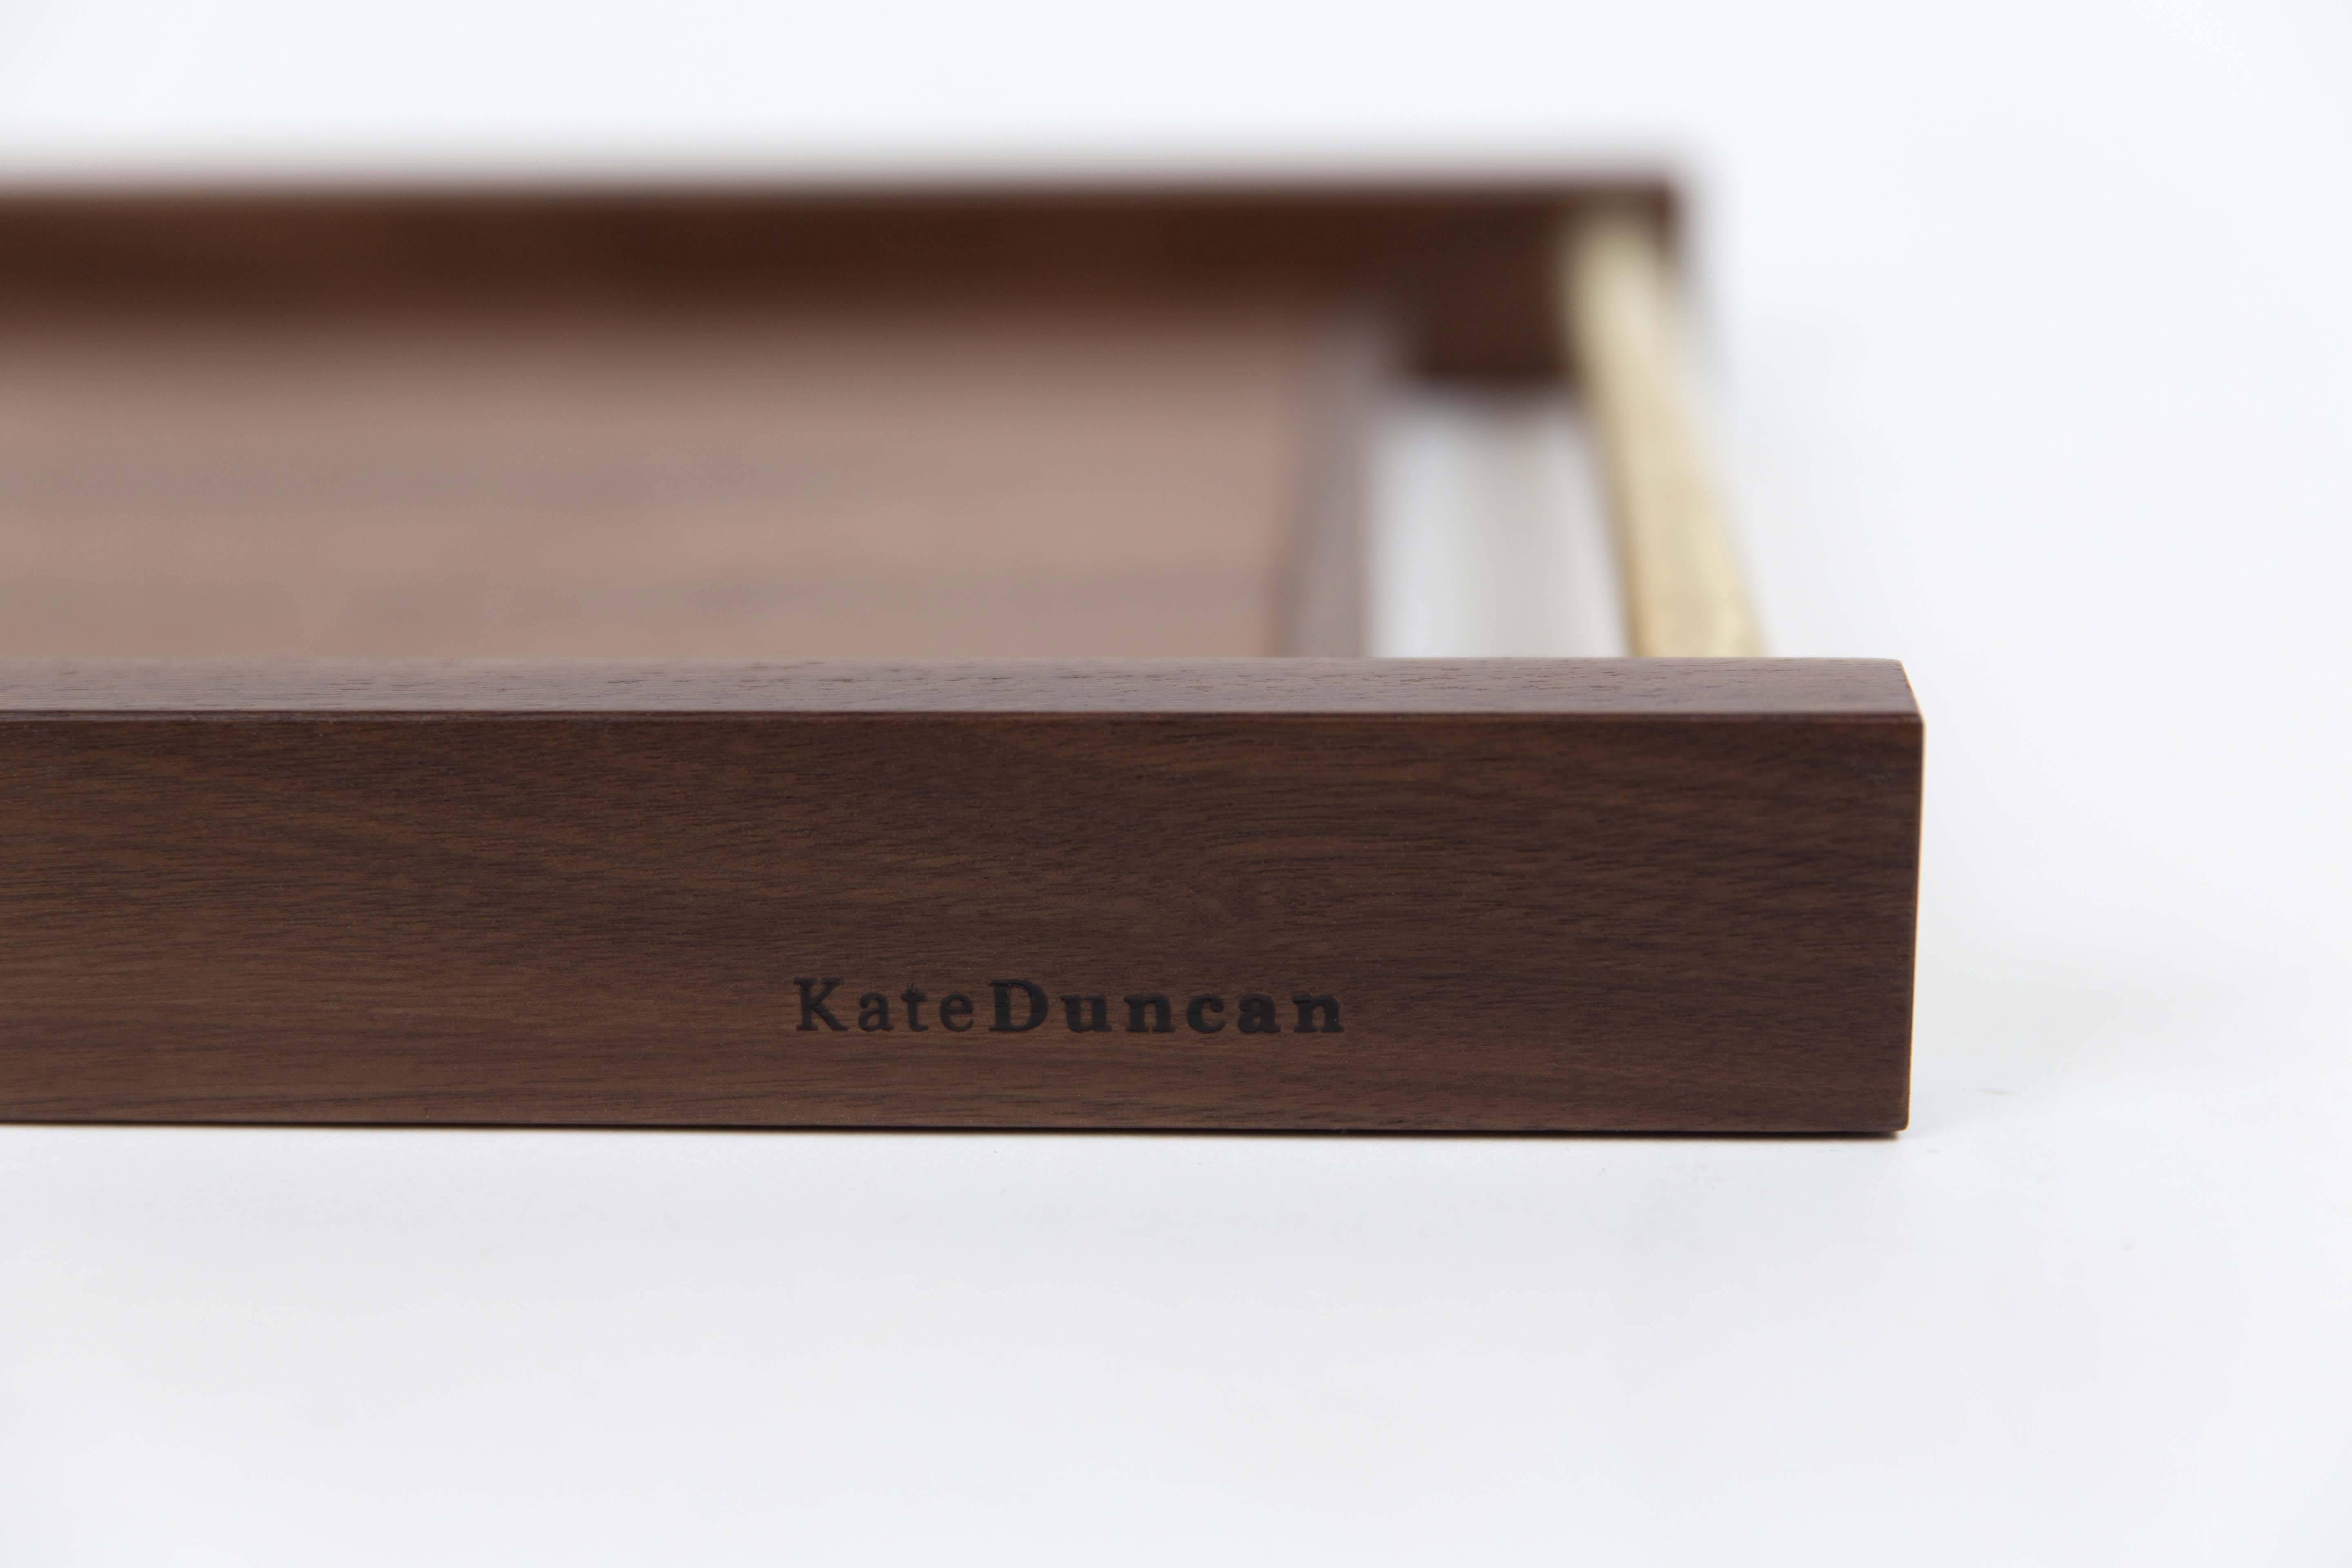 The Kate Duncan serving tray is made of a pair metal handles of either stainless steel or brass, inset into solid walnut or maple rails with a recessed center. 

Perfect for serving brunch, afternoon tea, or appetizers.

Hand-cut, assembled and